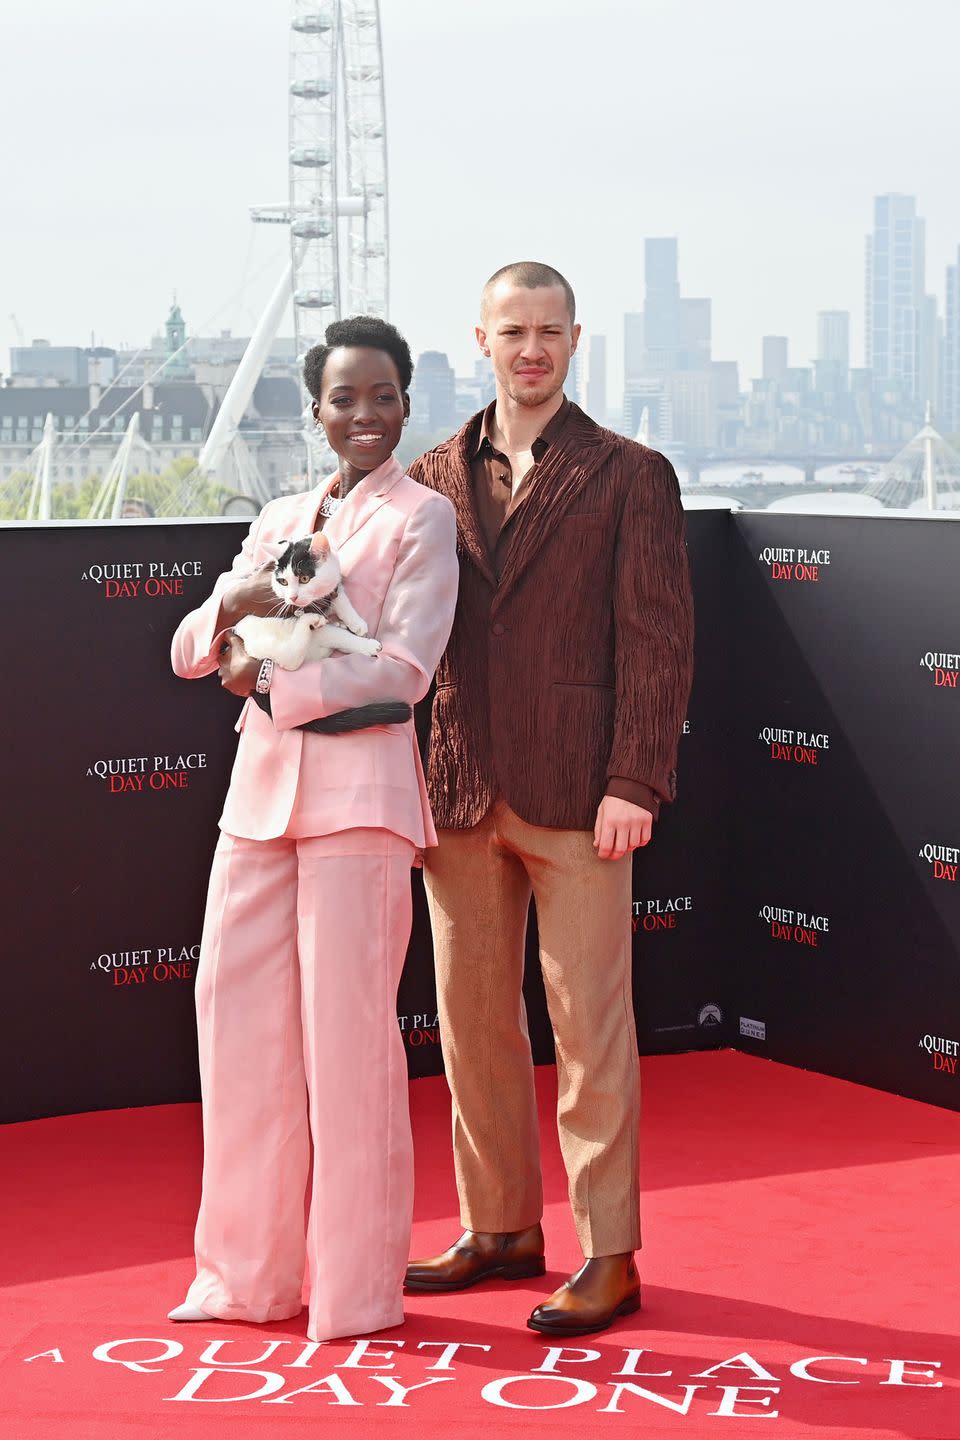 lupita nyong'o holding a cat, joseph quinn with a shaved head at the a quiet place day one photocall